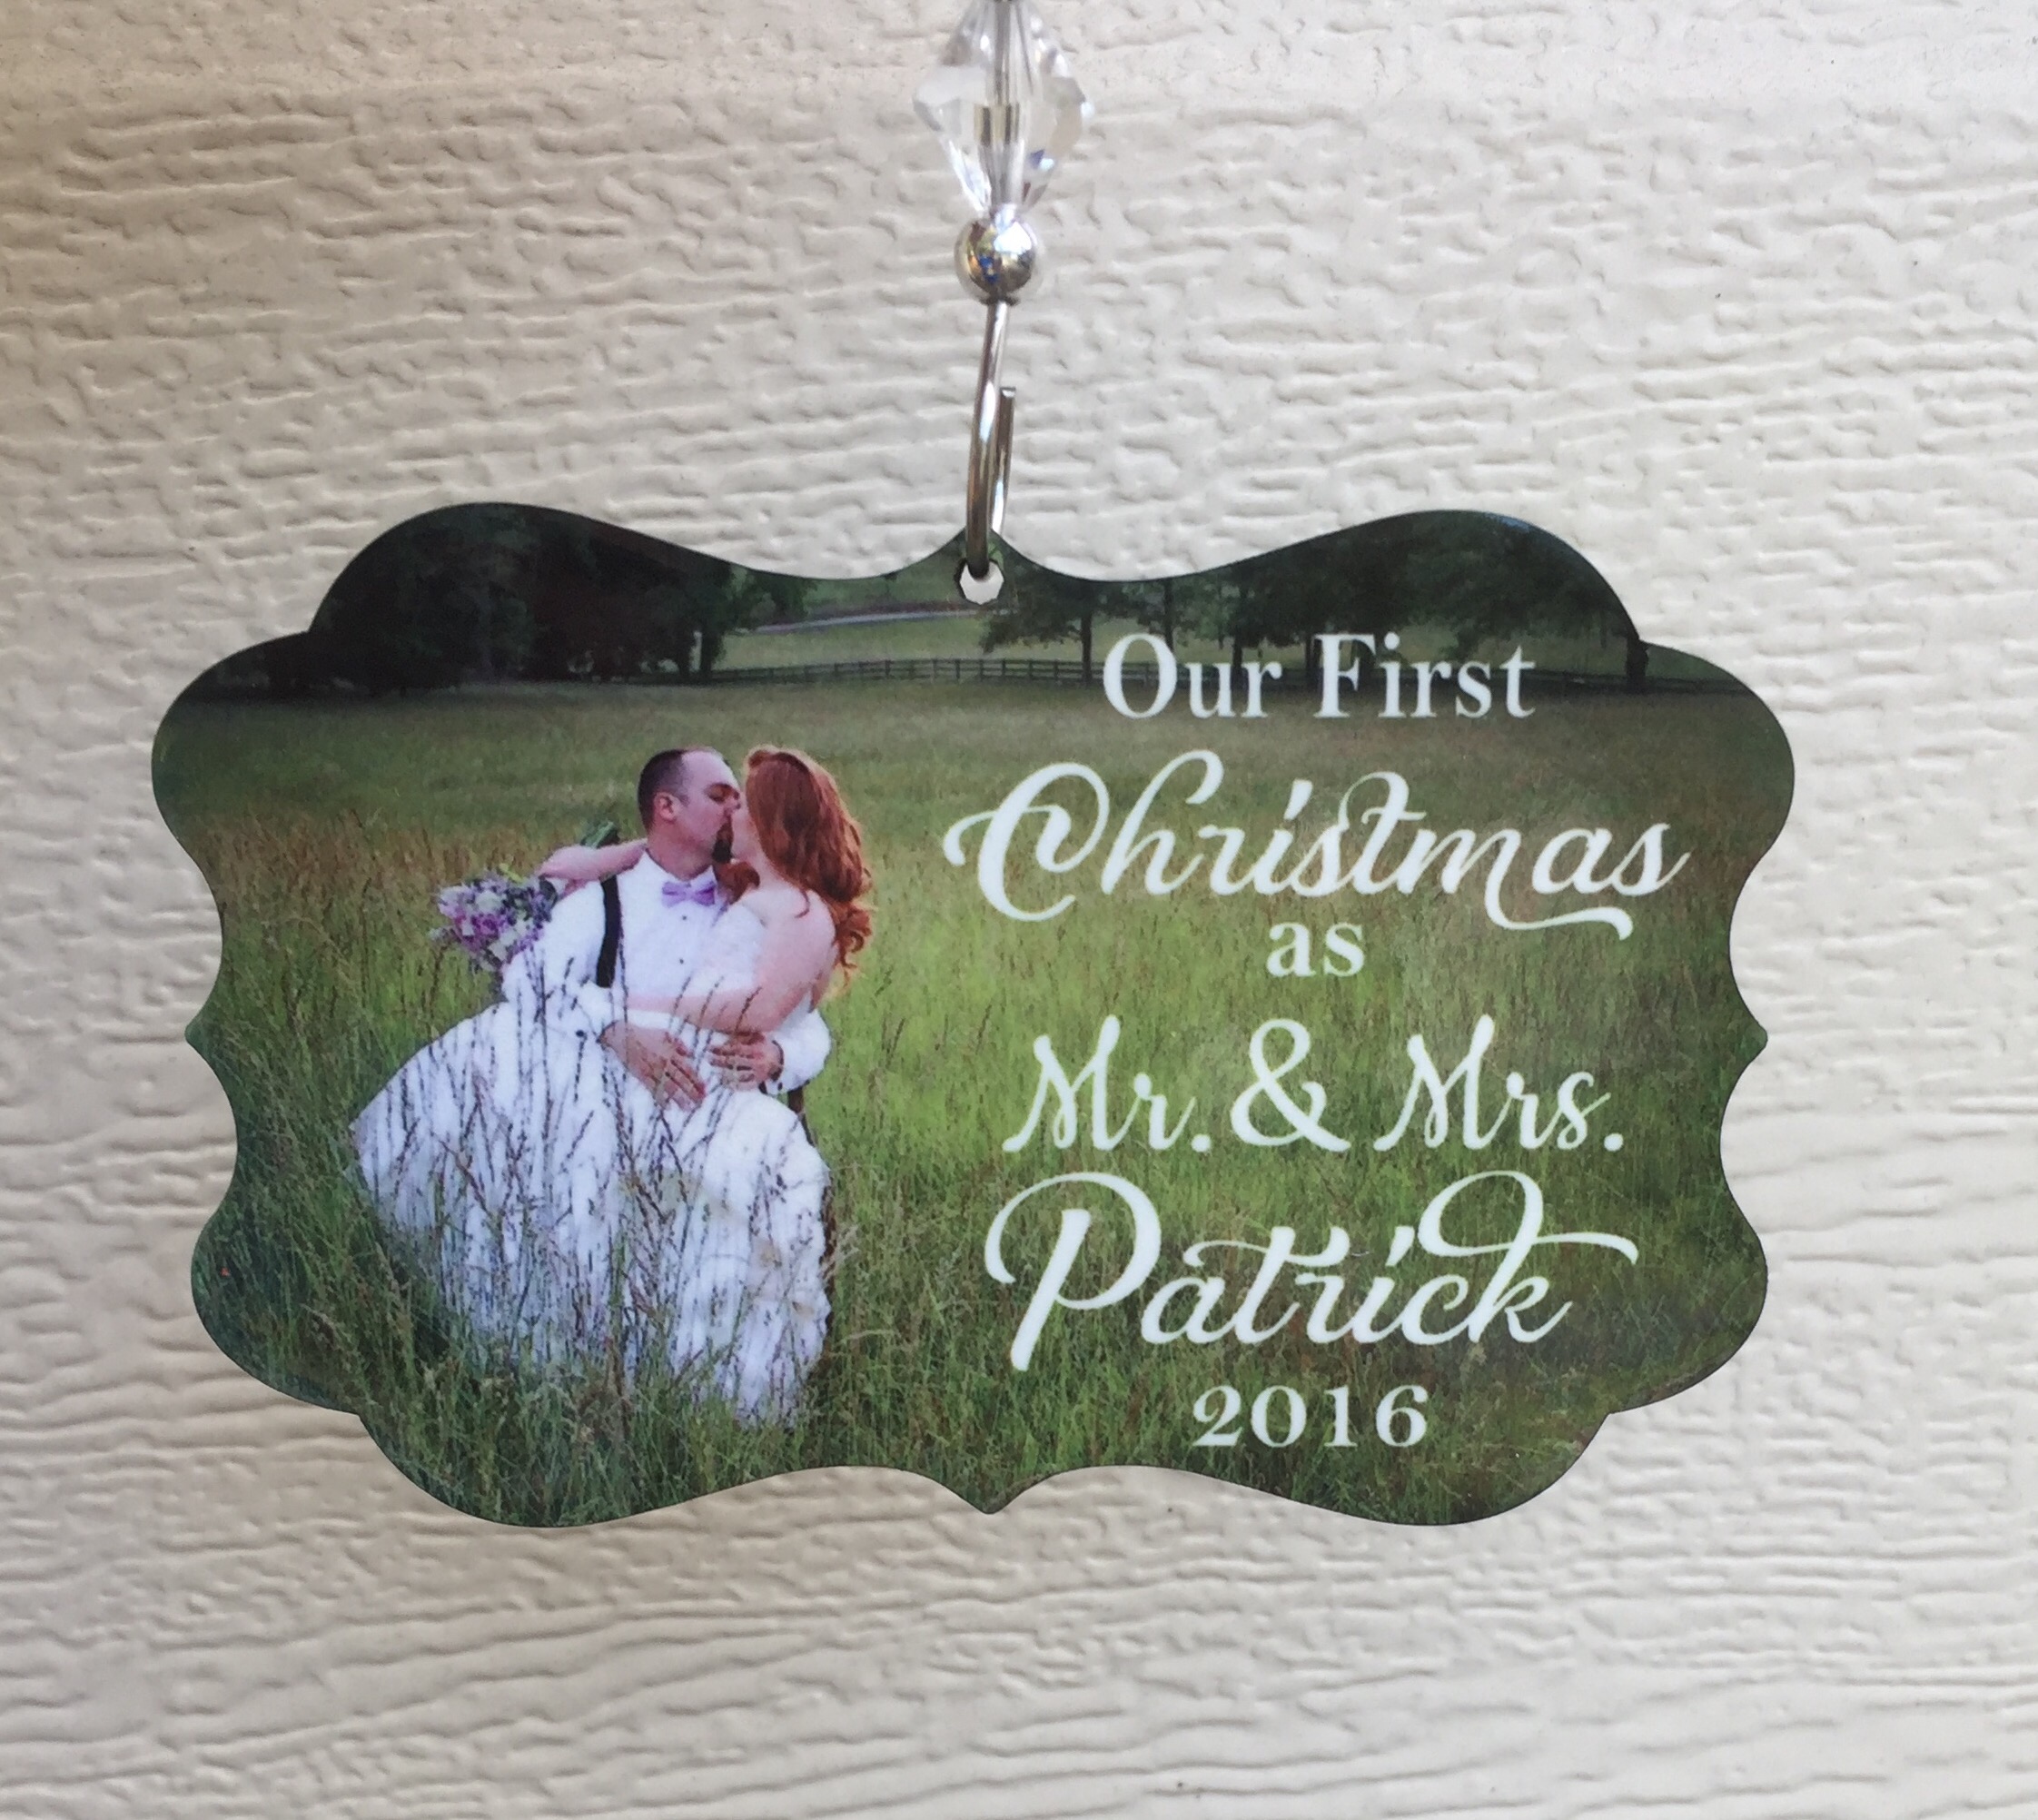 Wedding Ornament made with sublimation printing